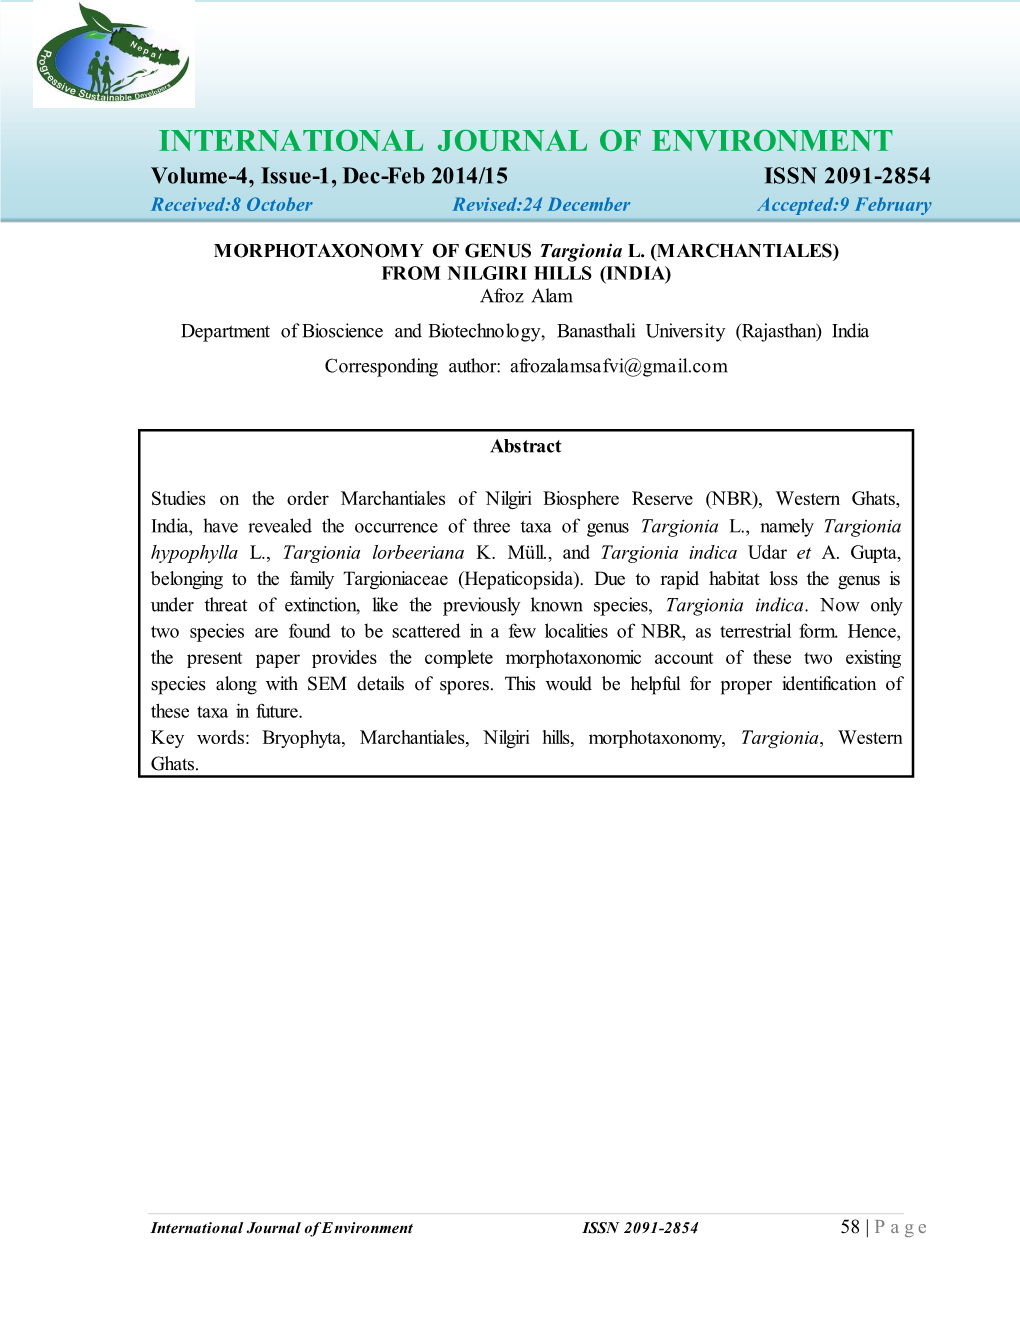 INTERNATIONAL JOURNAL of ENVIRONMENT Volume-4, Issue-1, Dec-Feb 2014/15 ISSN 2091-2854 Received:8 October Revised:24 December Accepted:9 February